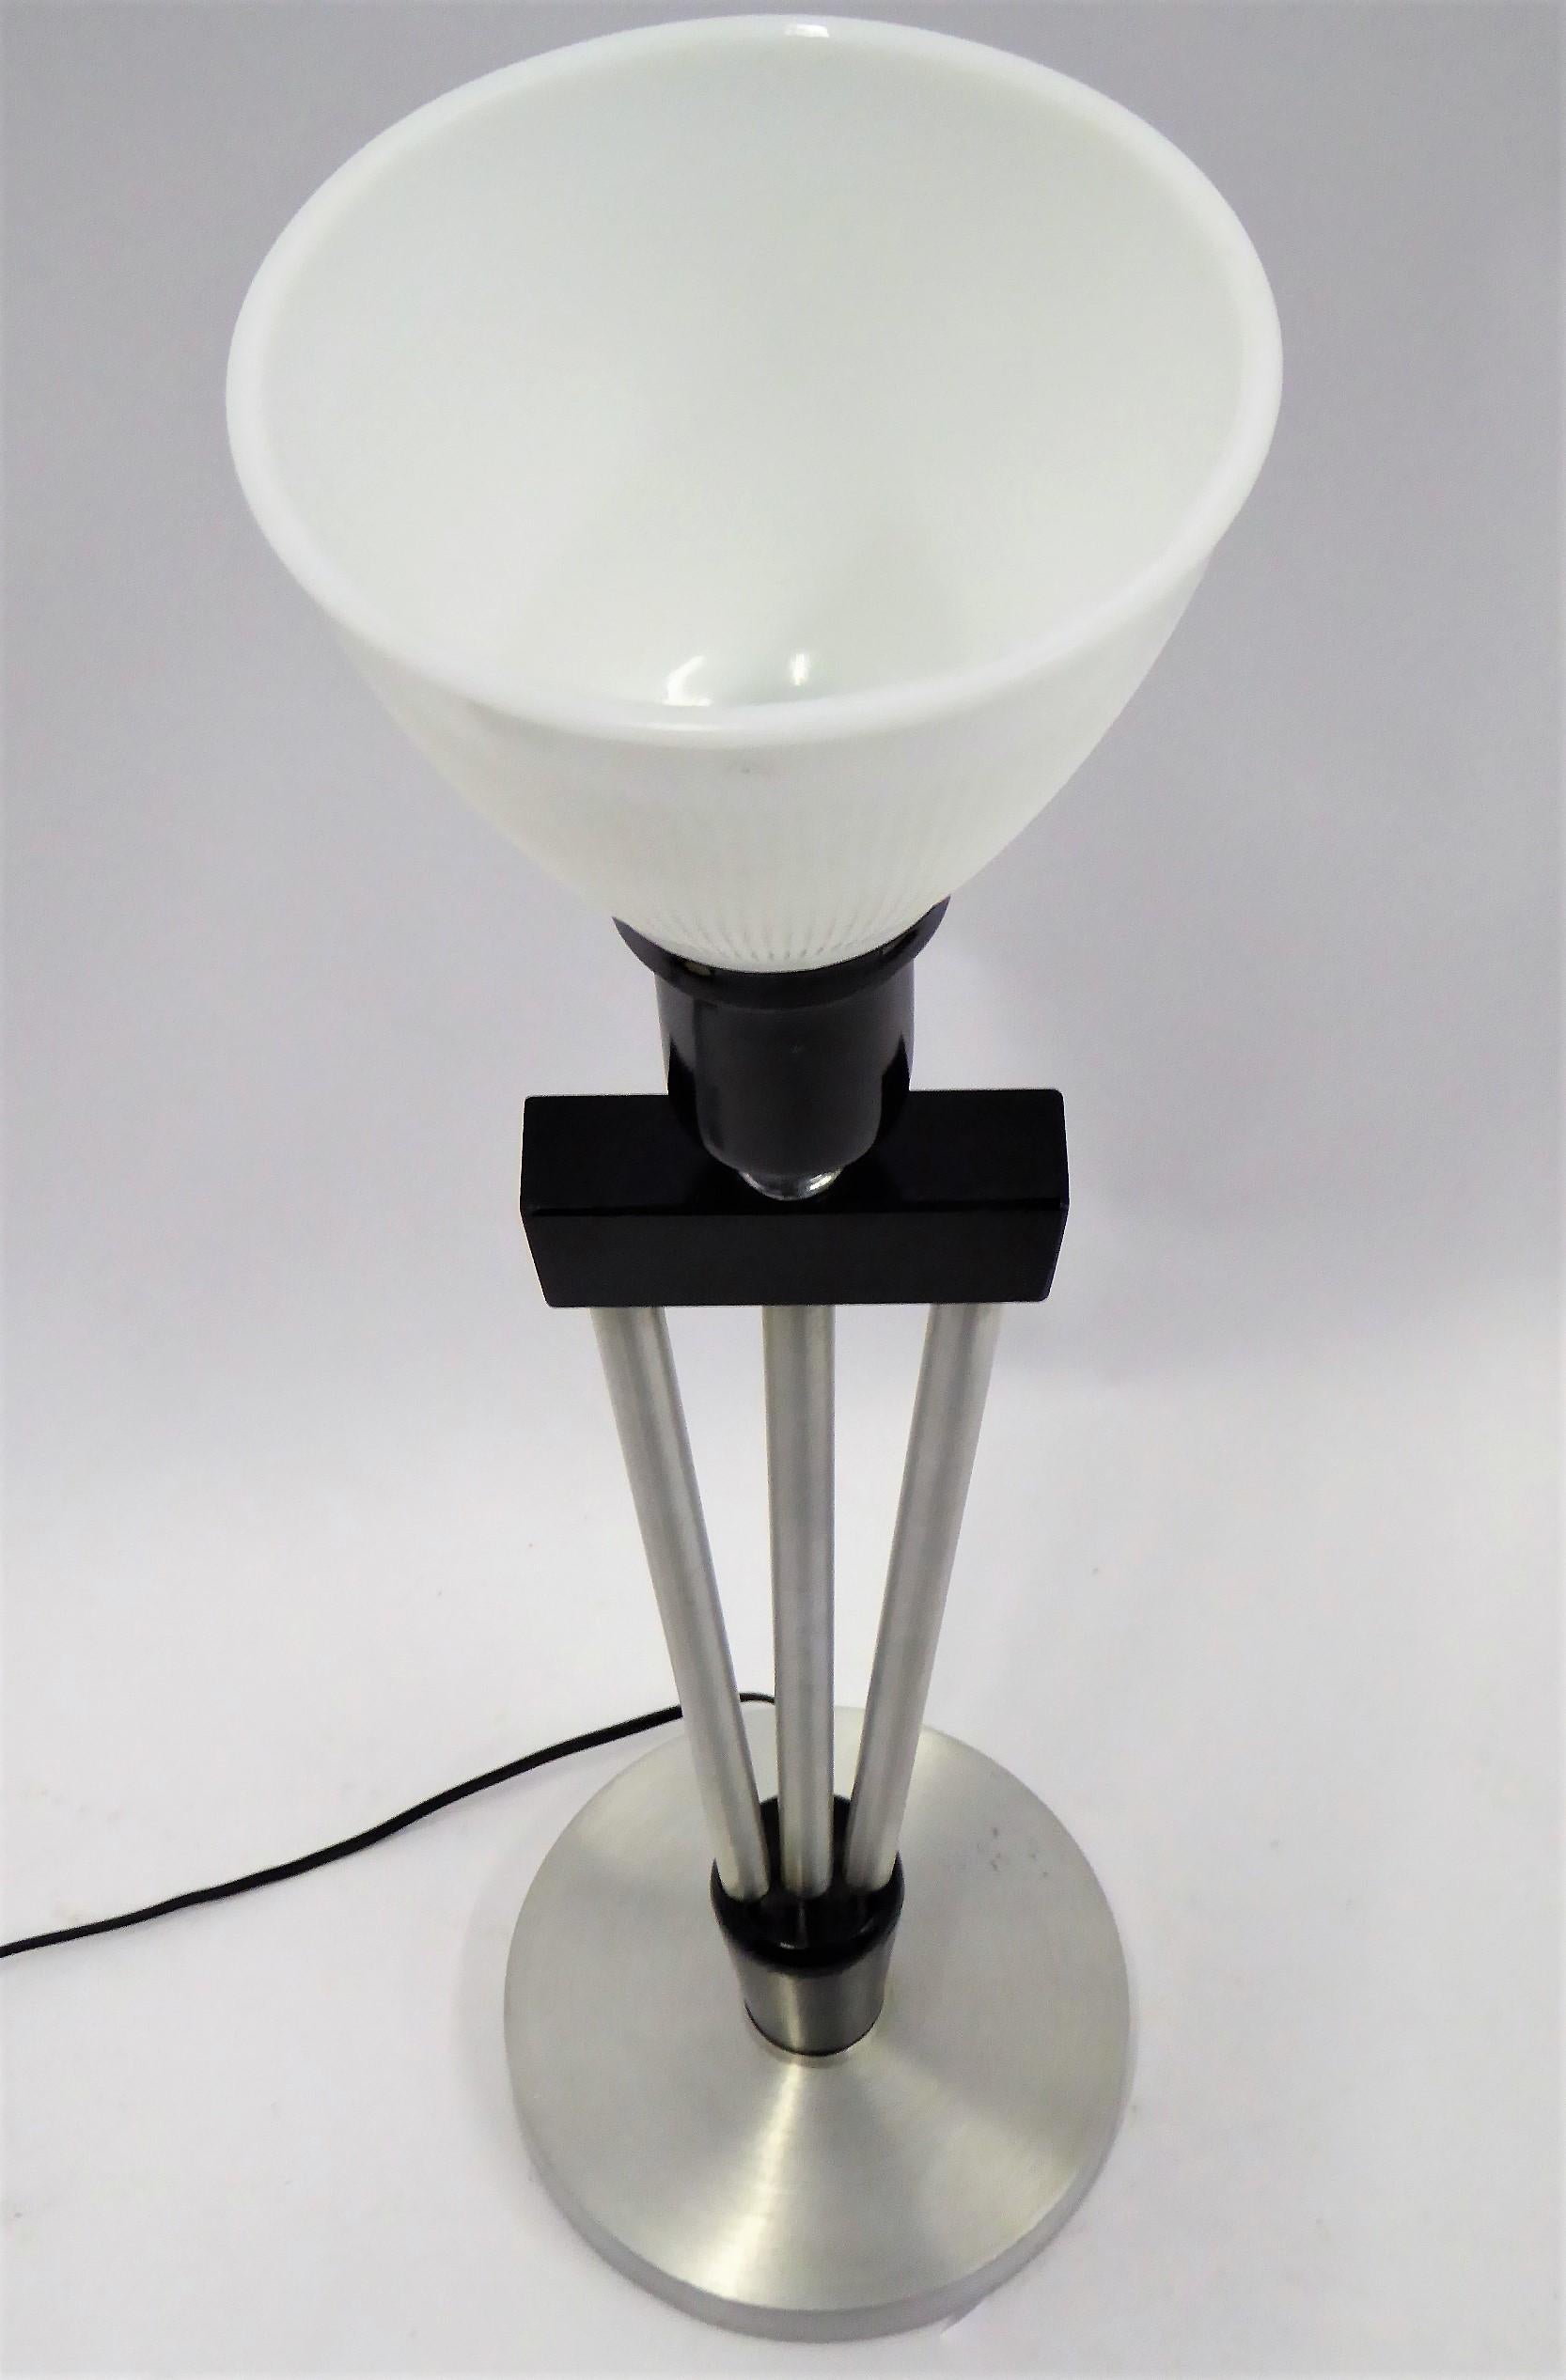  Russell Wright Spun Aluminum and Black Wood Table Lamp with Milk Glass Globe 1